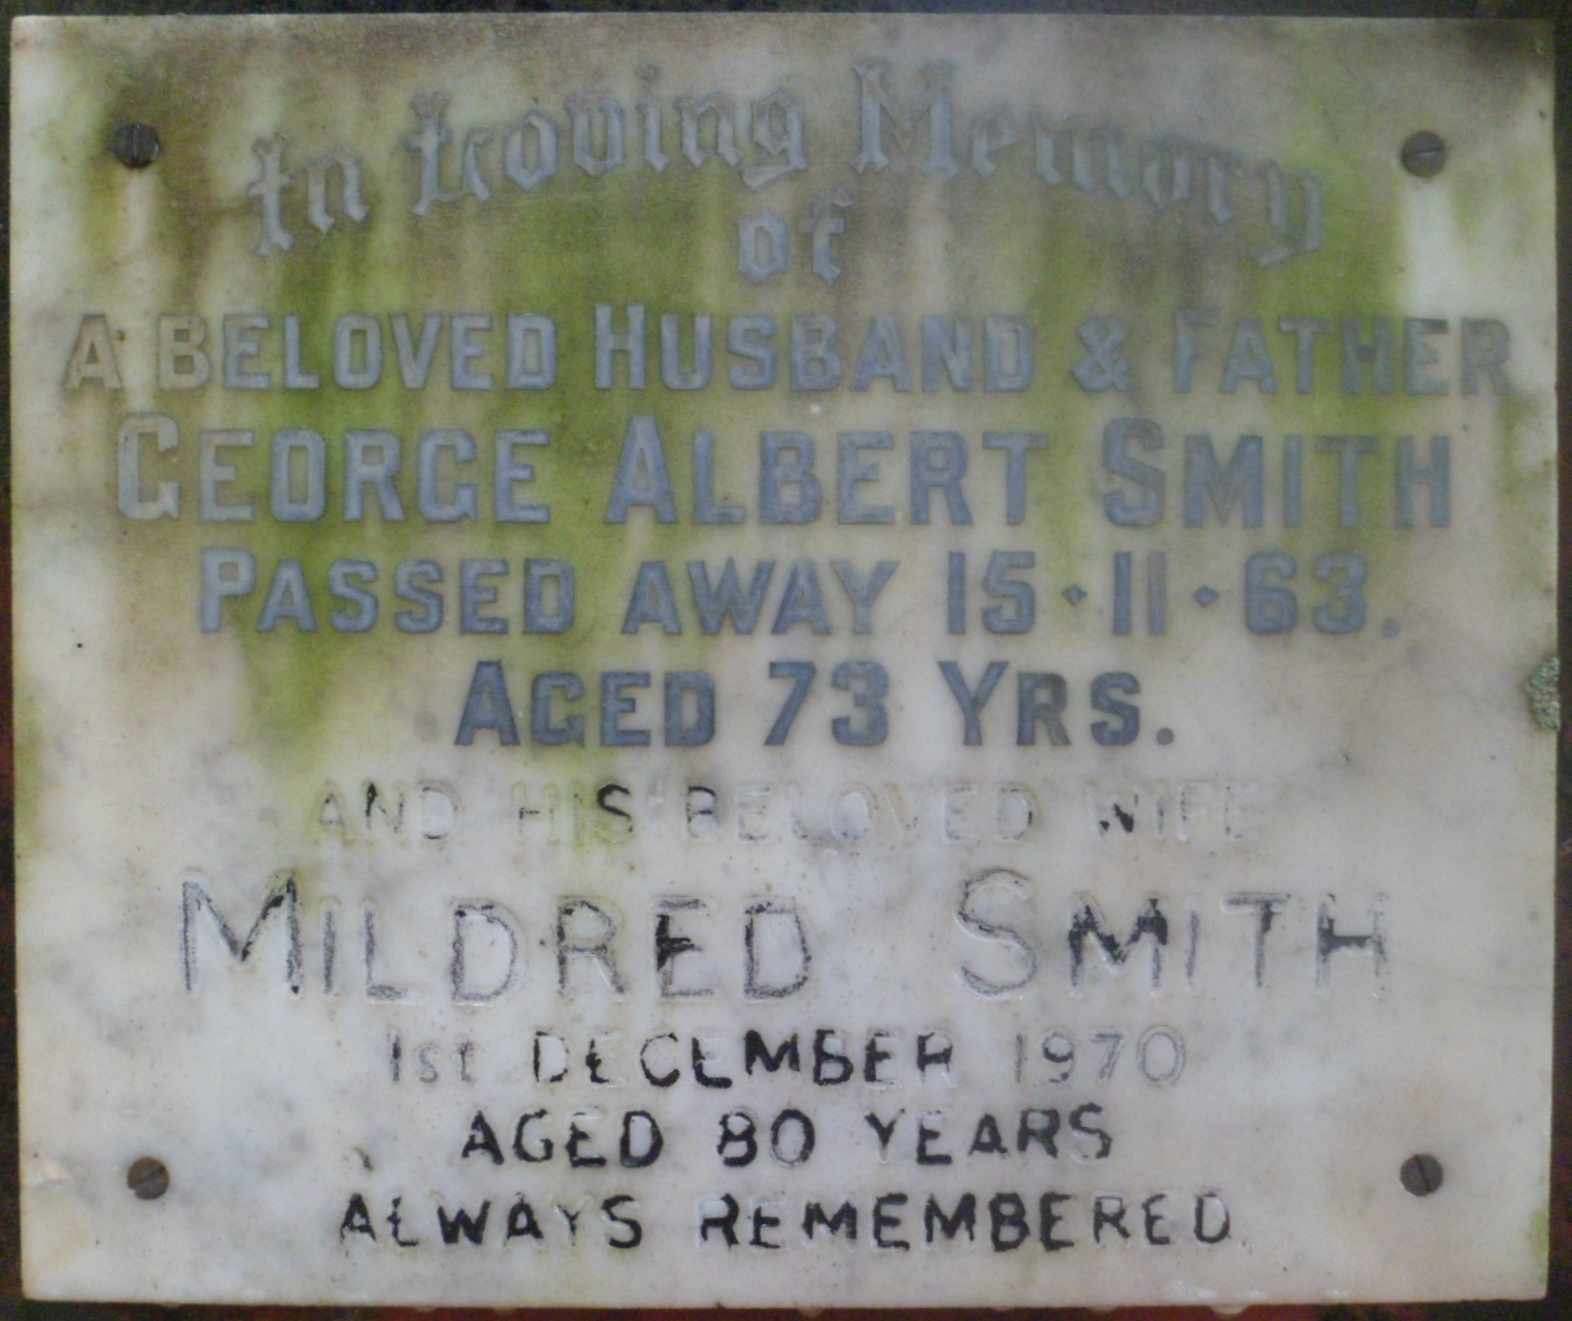 Memorial to George Albert Smith and Mildred (Lawson) Smith